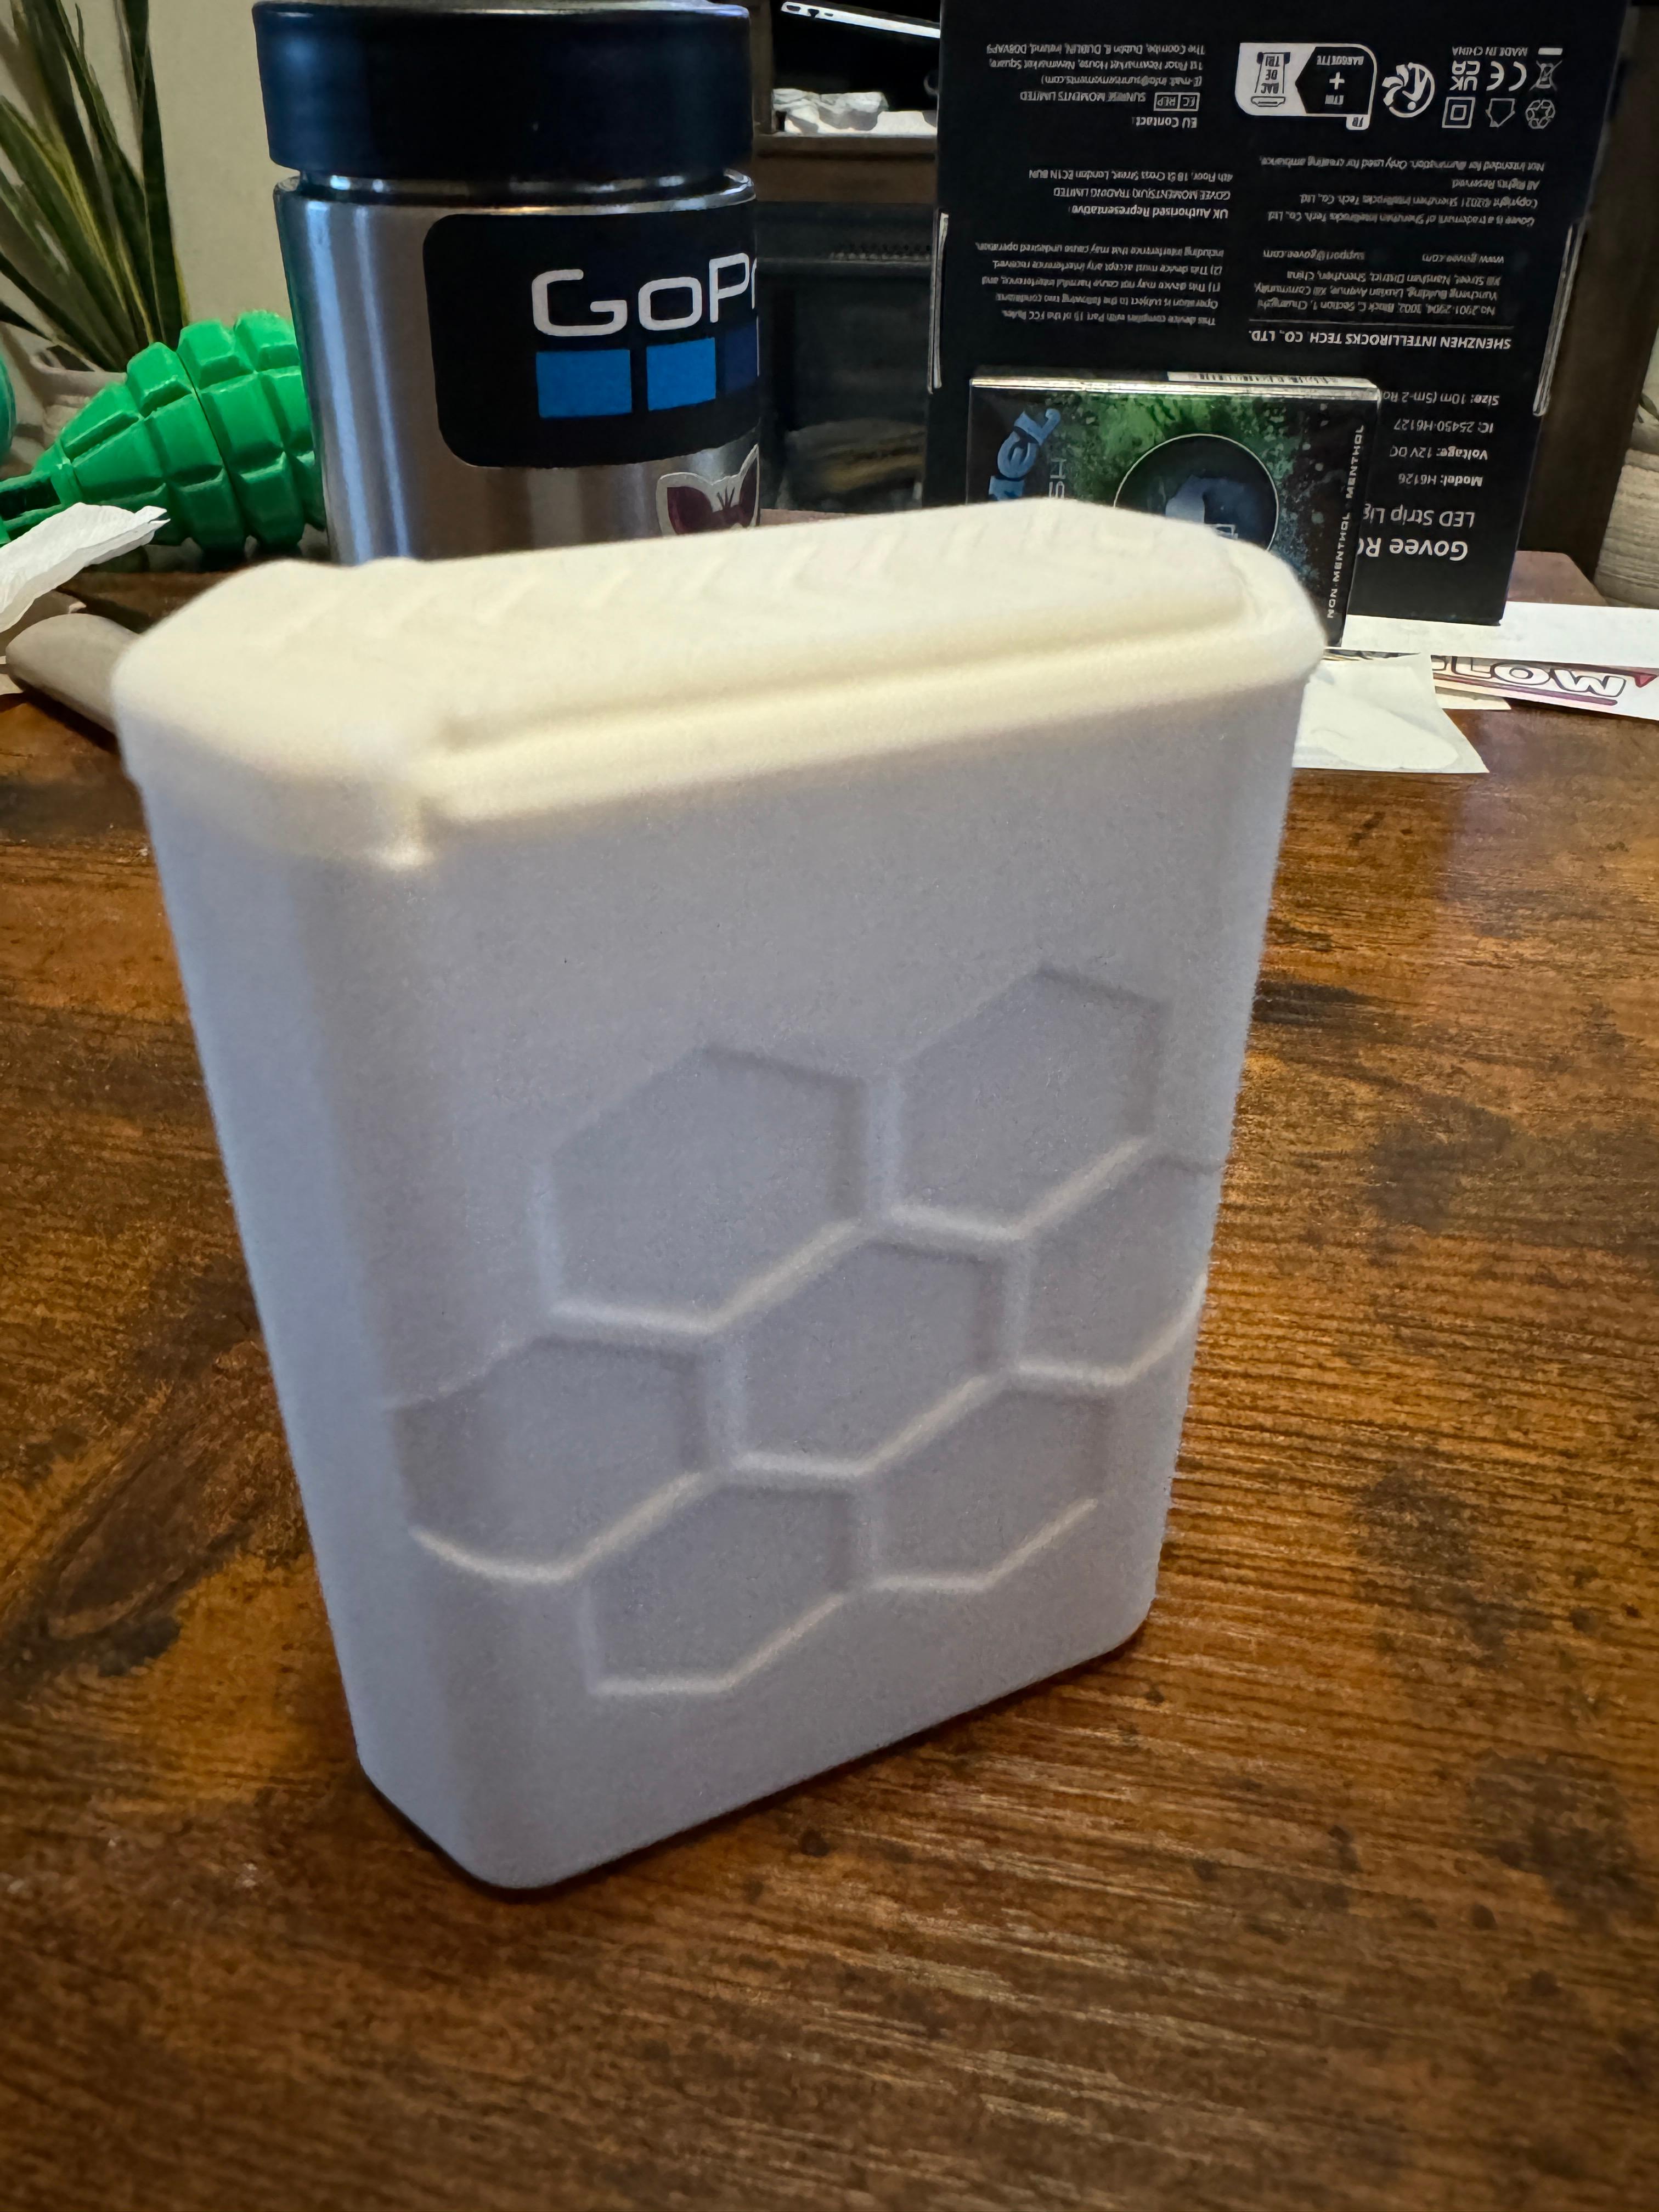 Cigarette Case  - Printed this with my new Creality K1 Max. For the case I scaled the Z axis down a few millimeters. And for the lid, to get more of a pressure fit, I scaled the Z 1% up. 

Thanks for sharing the files. No more crushed boxes! - 3d model